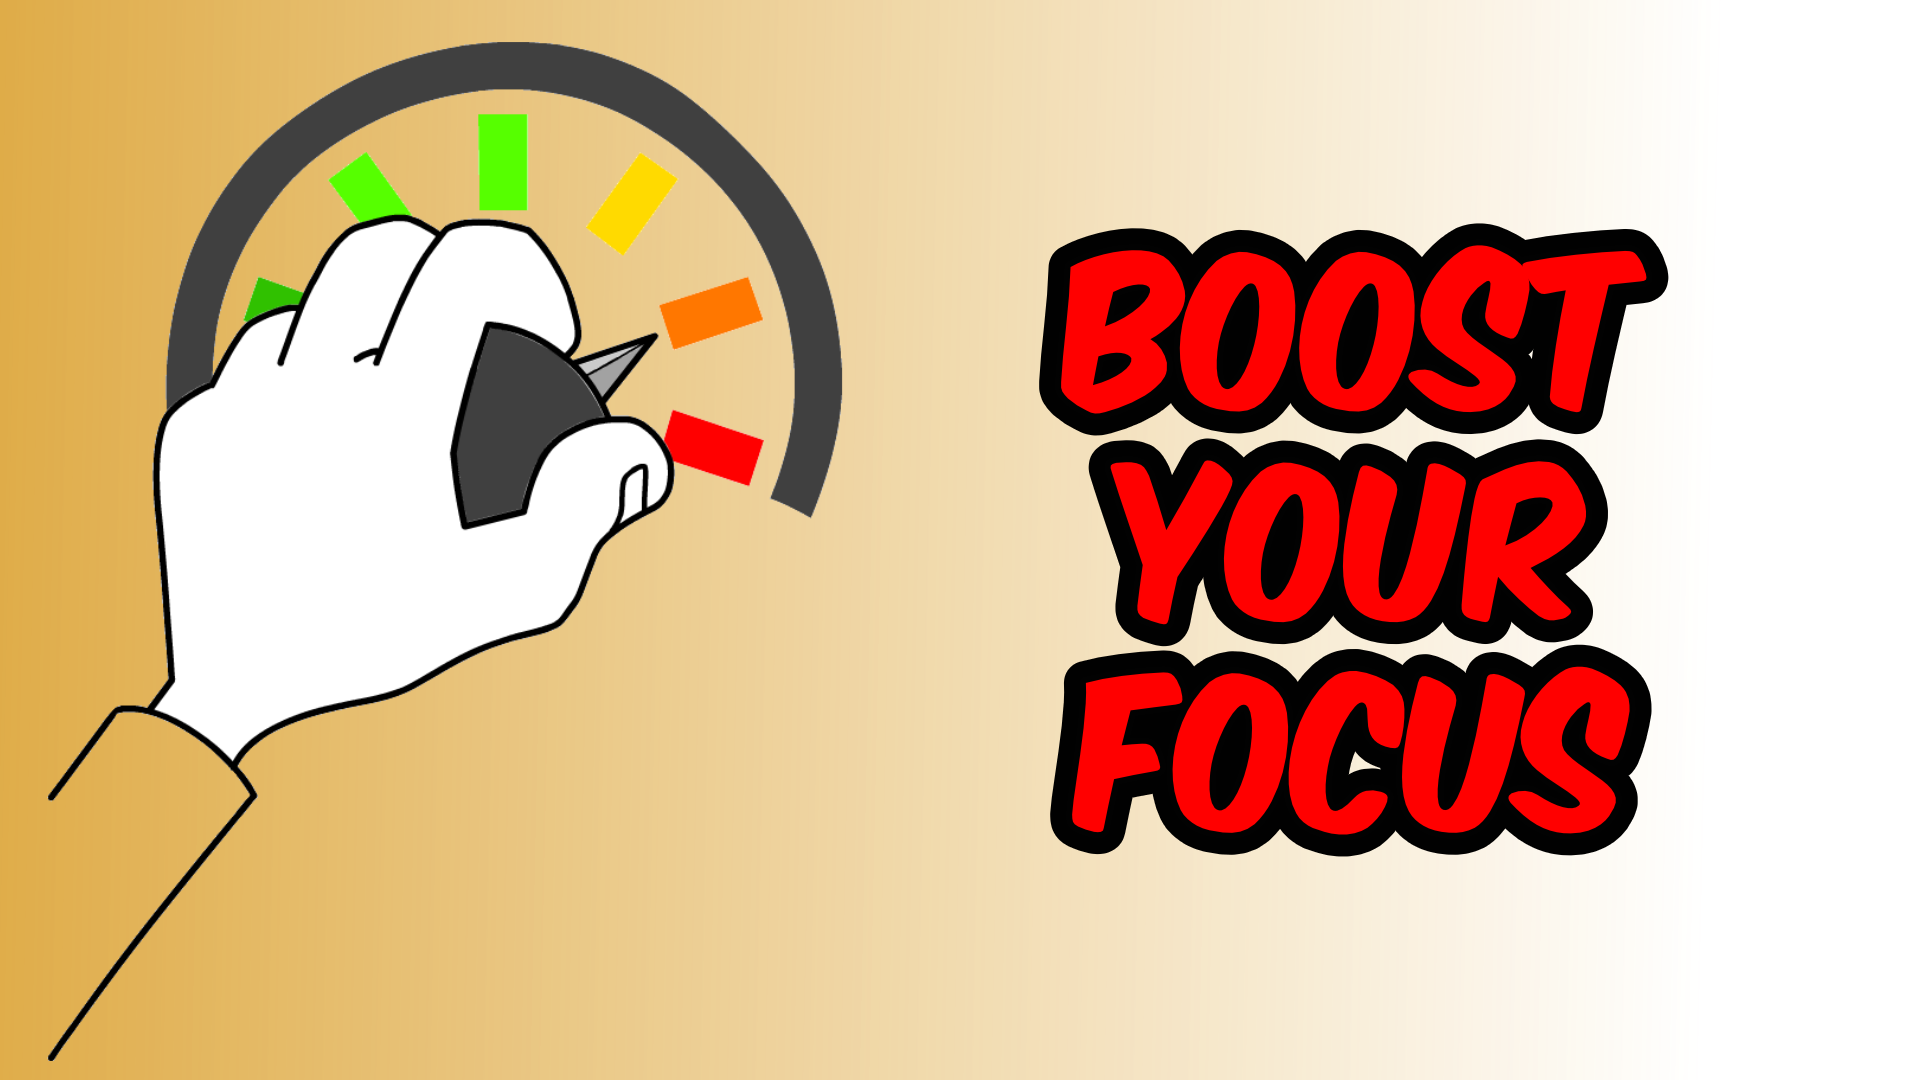 Do You Struggle With Focus Practice These 3 Easy Habits